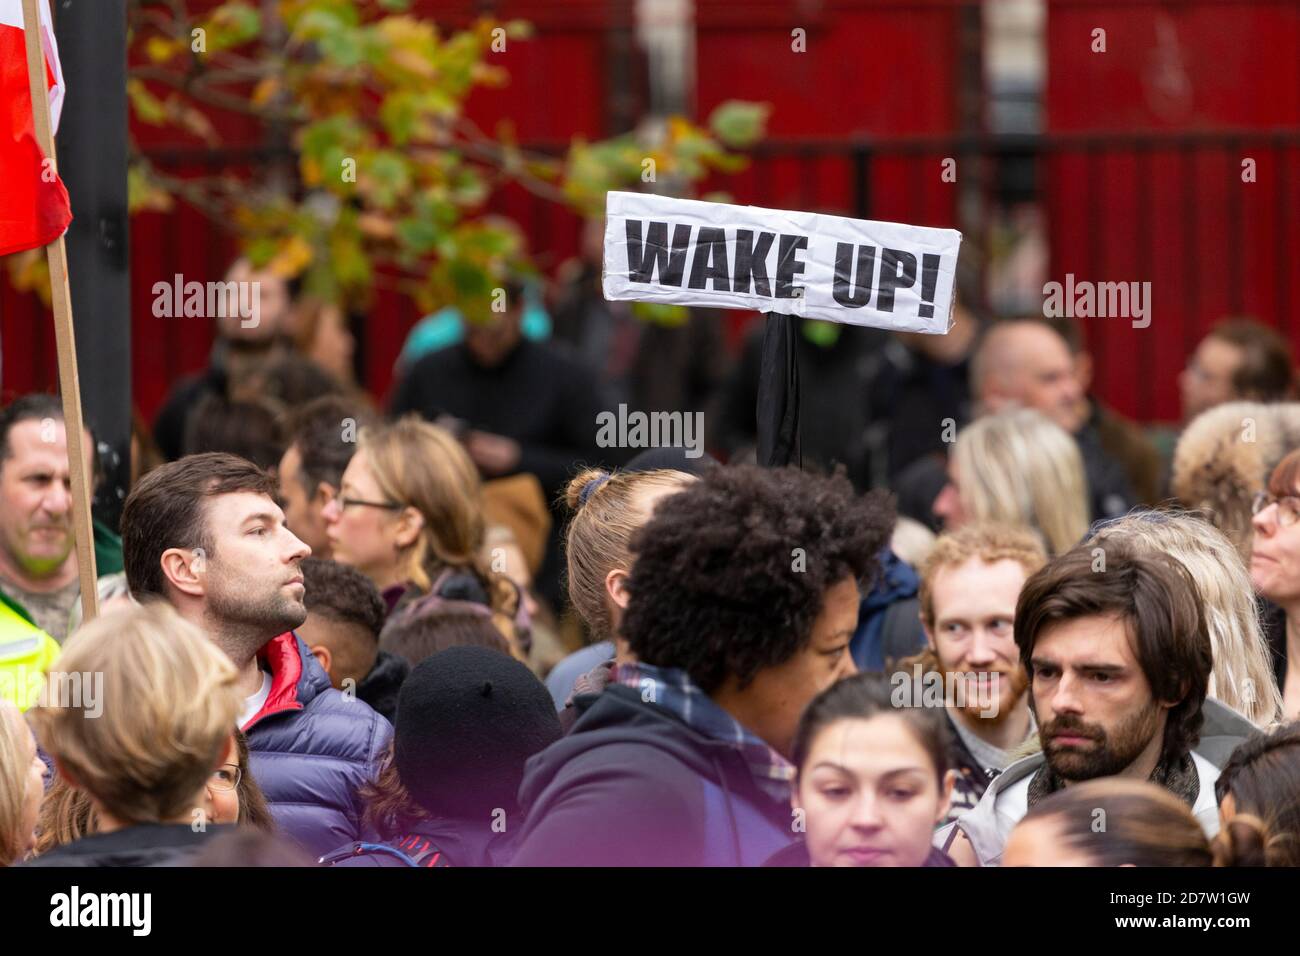 Protest sign held above a crowd during an anti-lockdown rally in London, 24 October 2020 Stock Photo